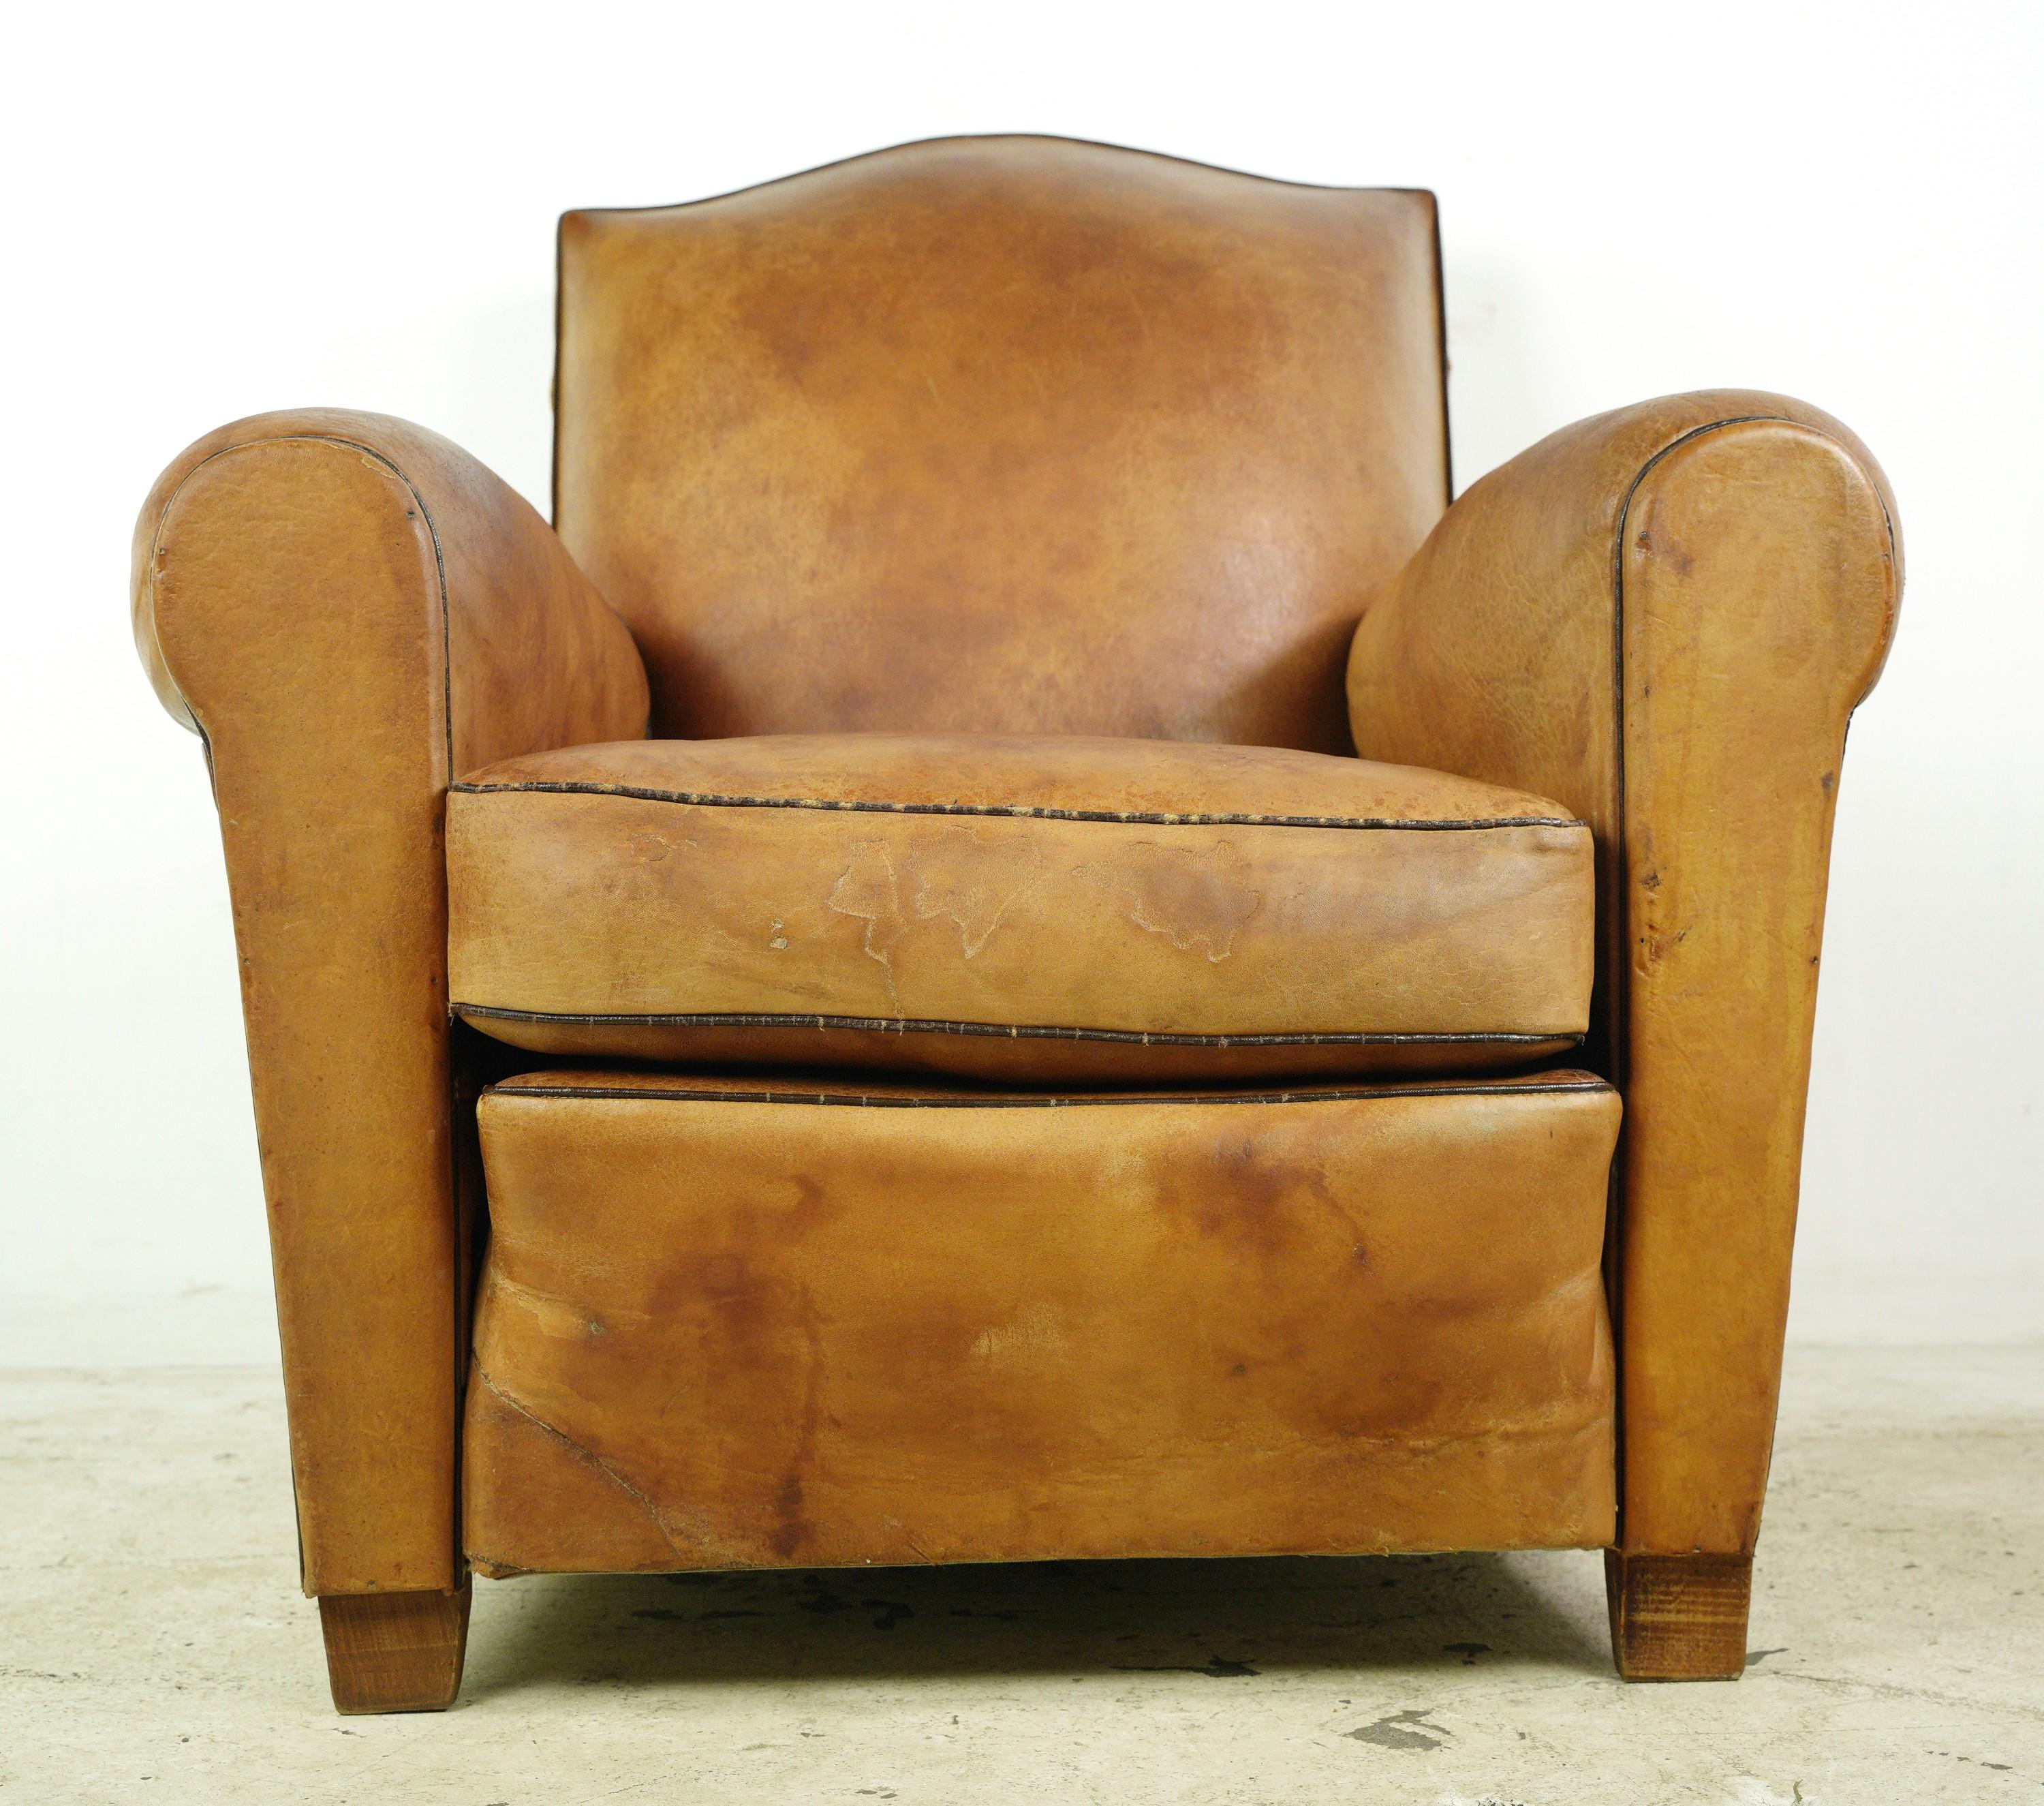 This European club chair is upholstered in tan leather, features a distinctive moustache shaped back and steel studs. This chair combines vintage charm with unique design elements, offering both comfort and visual appeal in a sophisticated seating